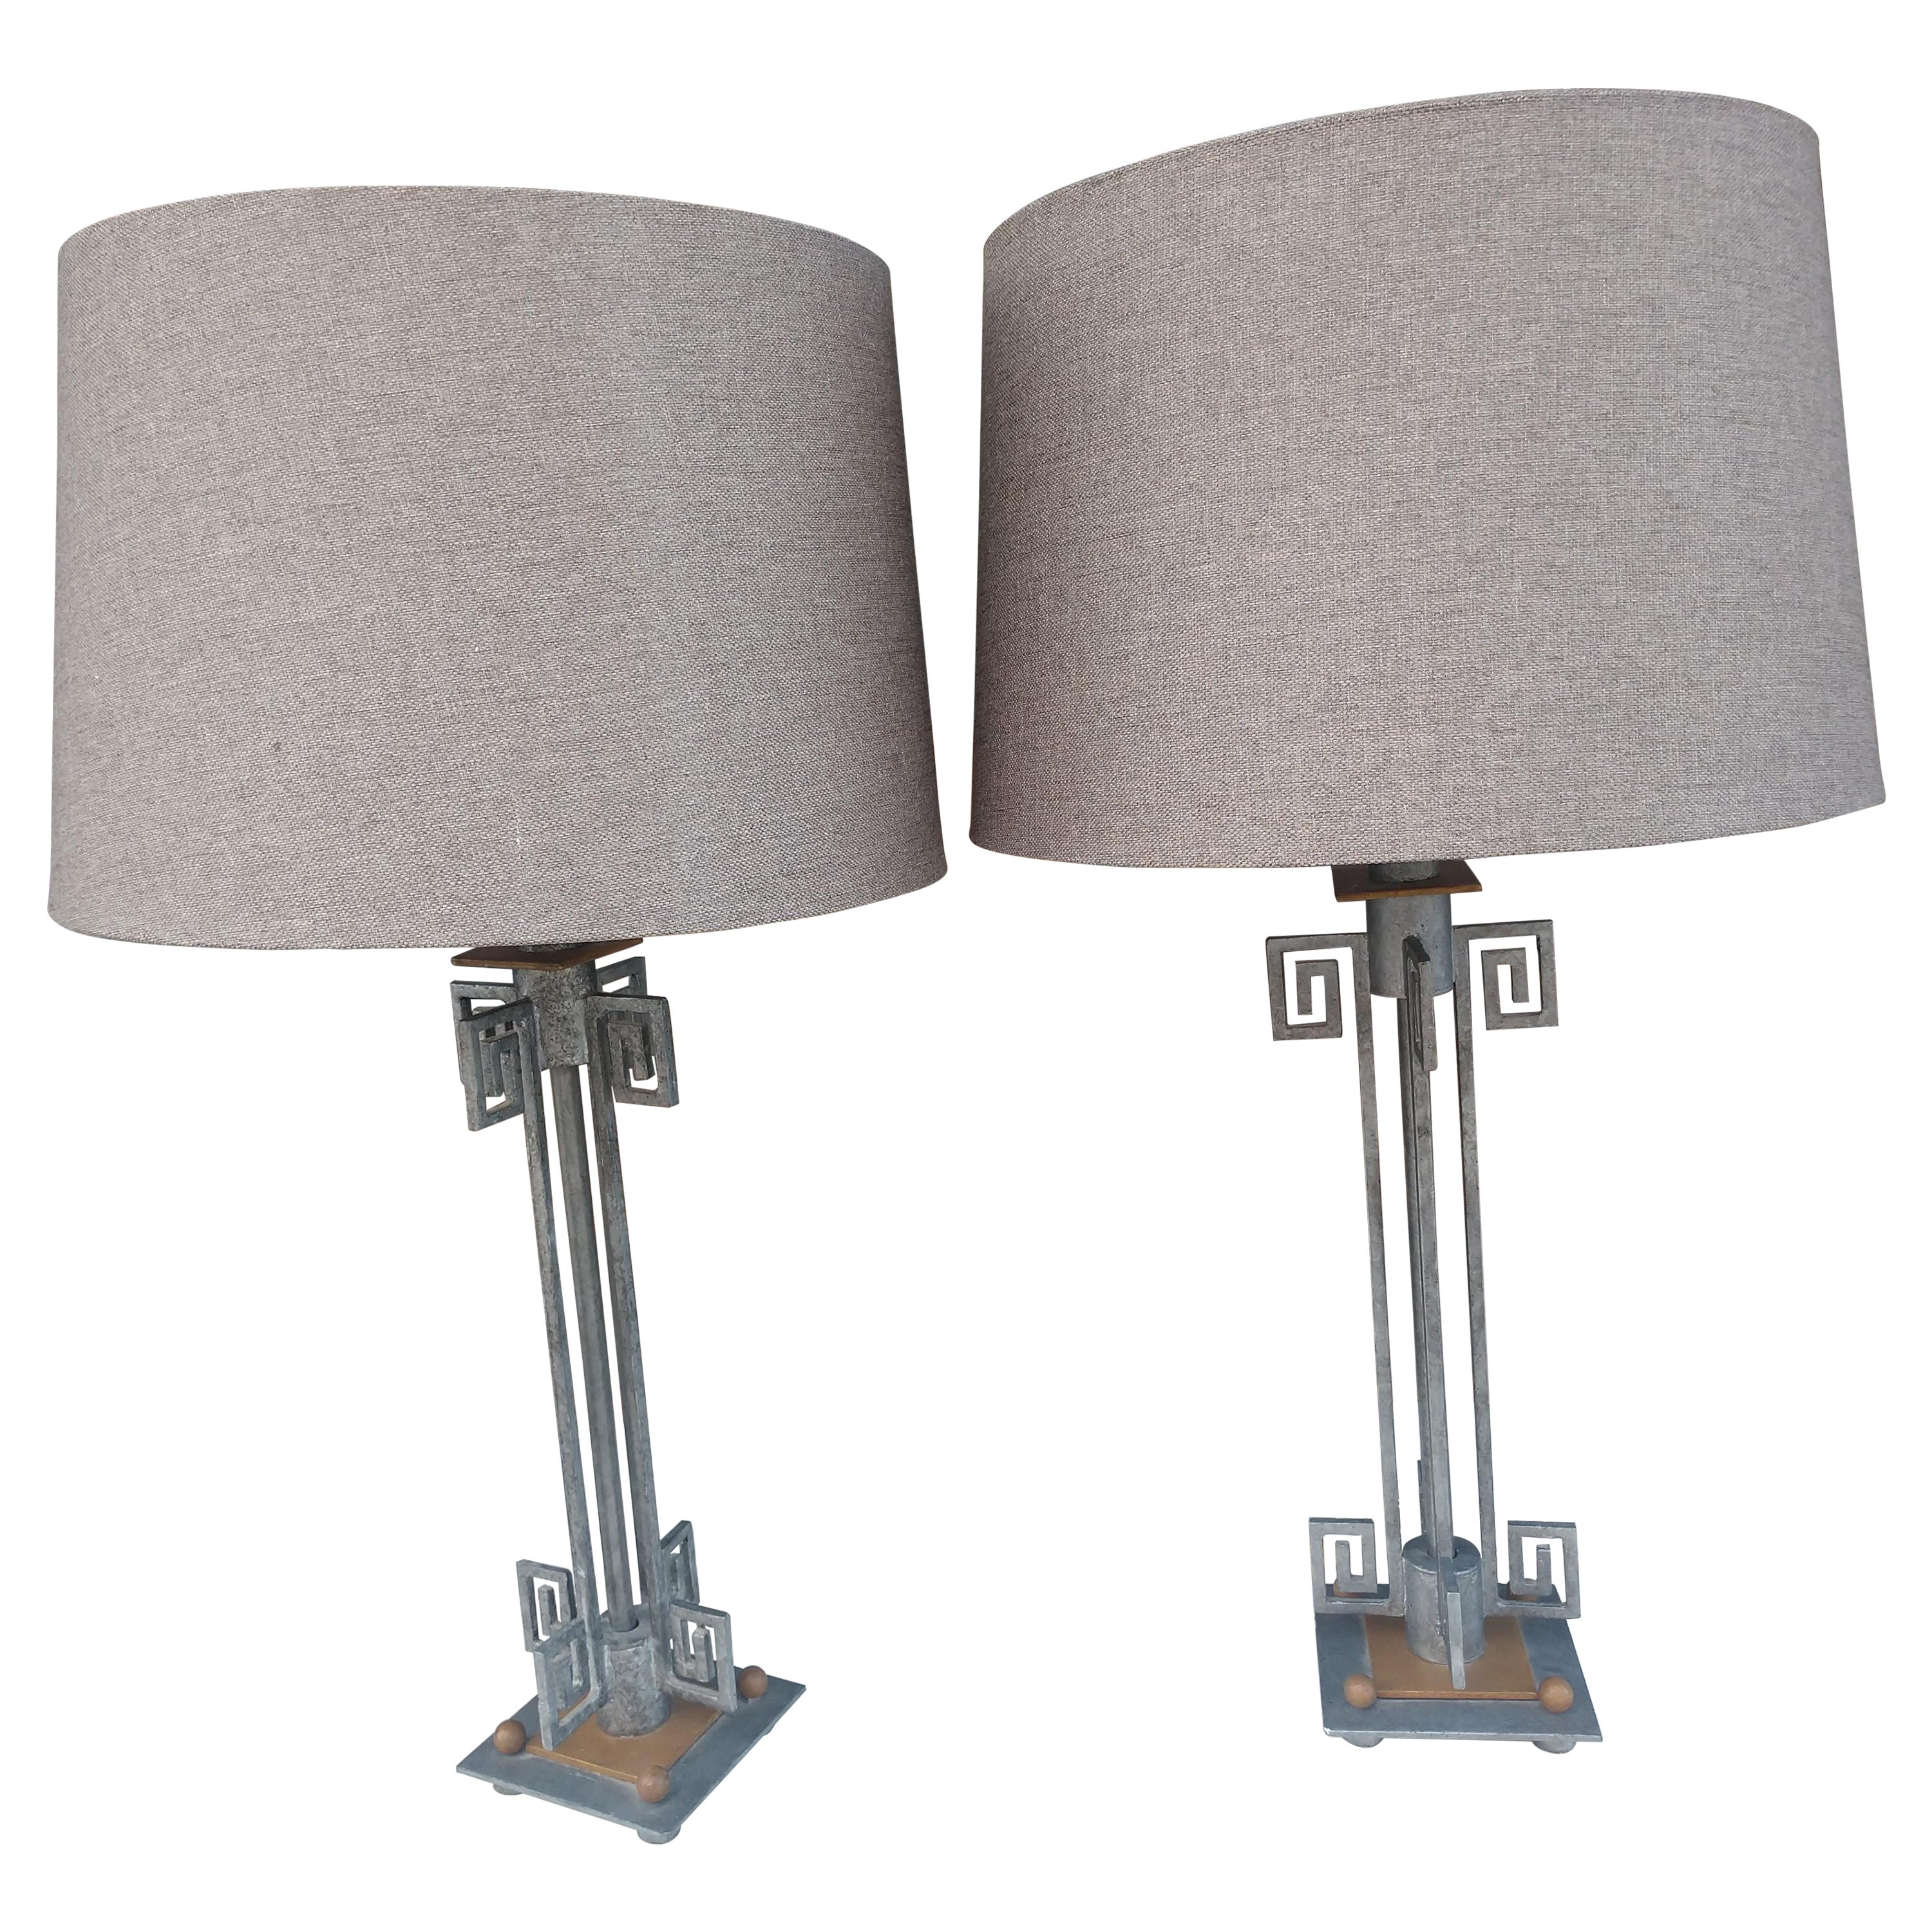 Mid Century Modern Pair Of Table Lamps, Silver Greek Key Table Lamp